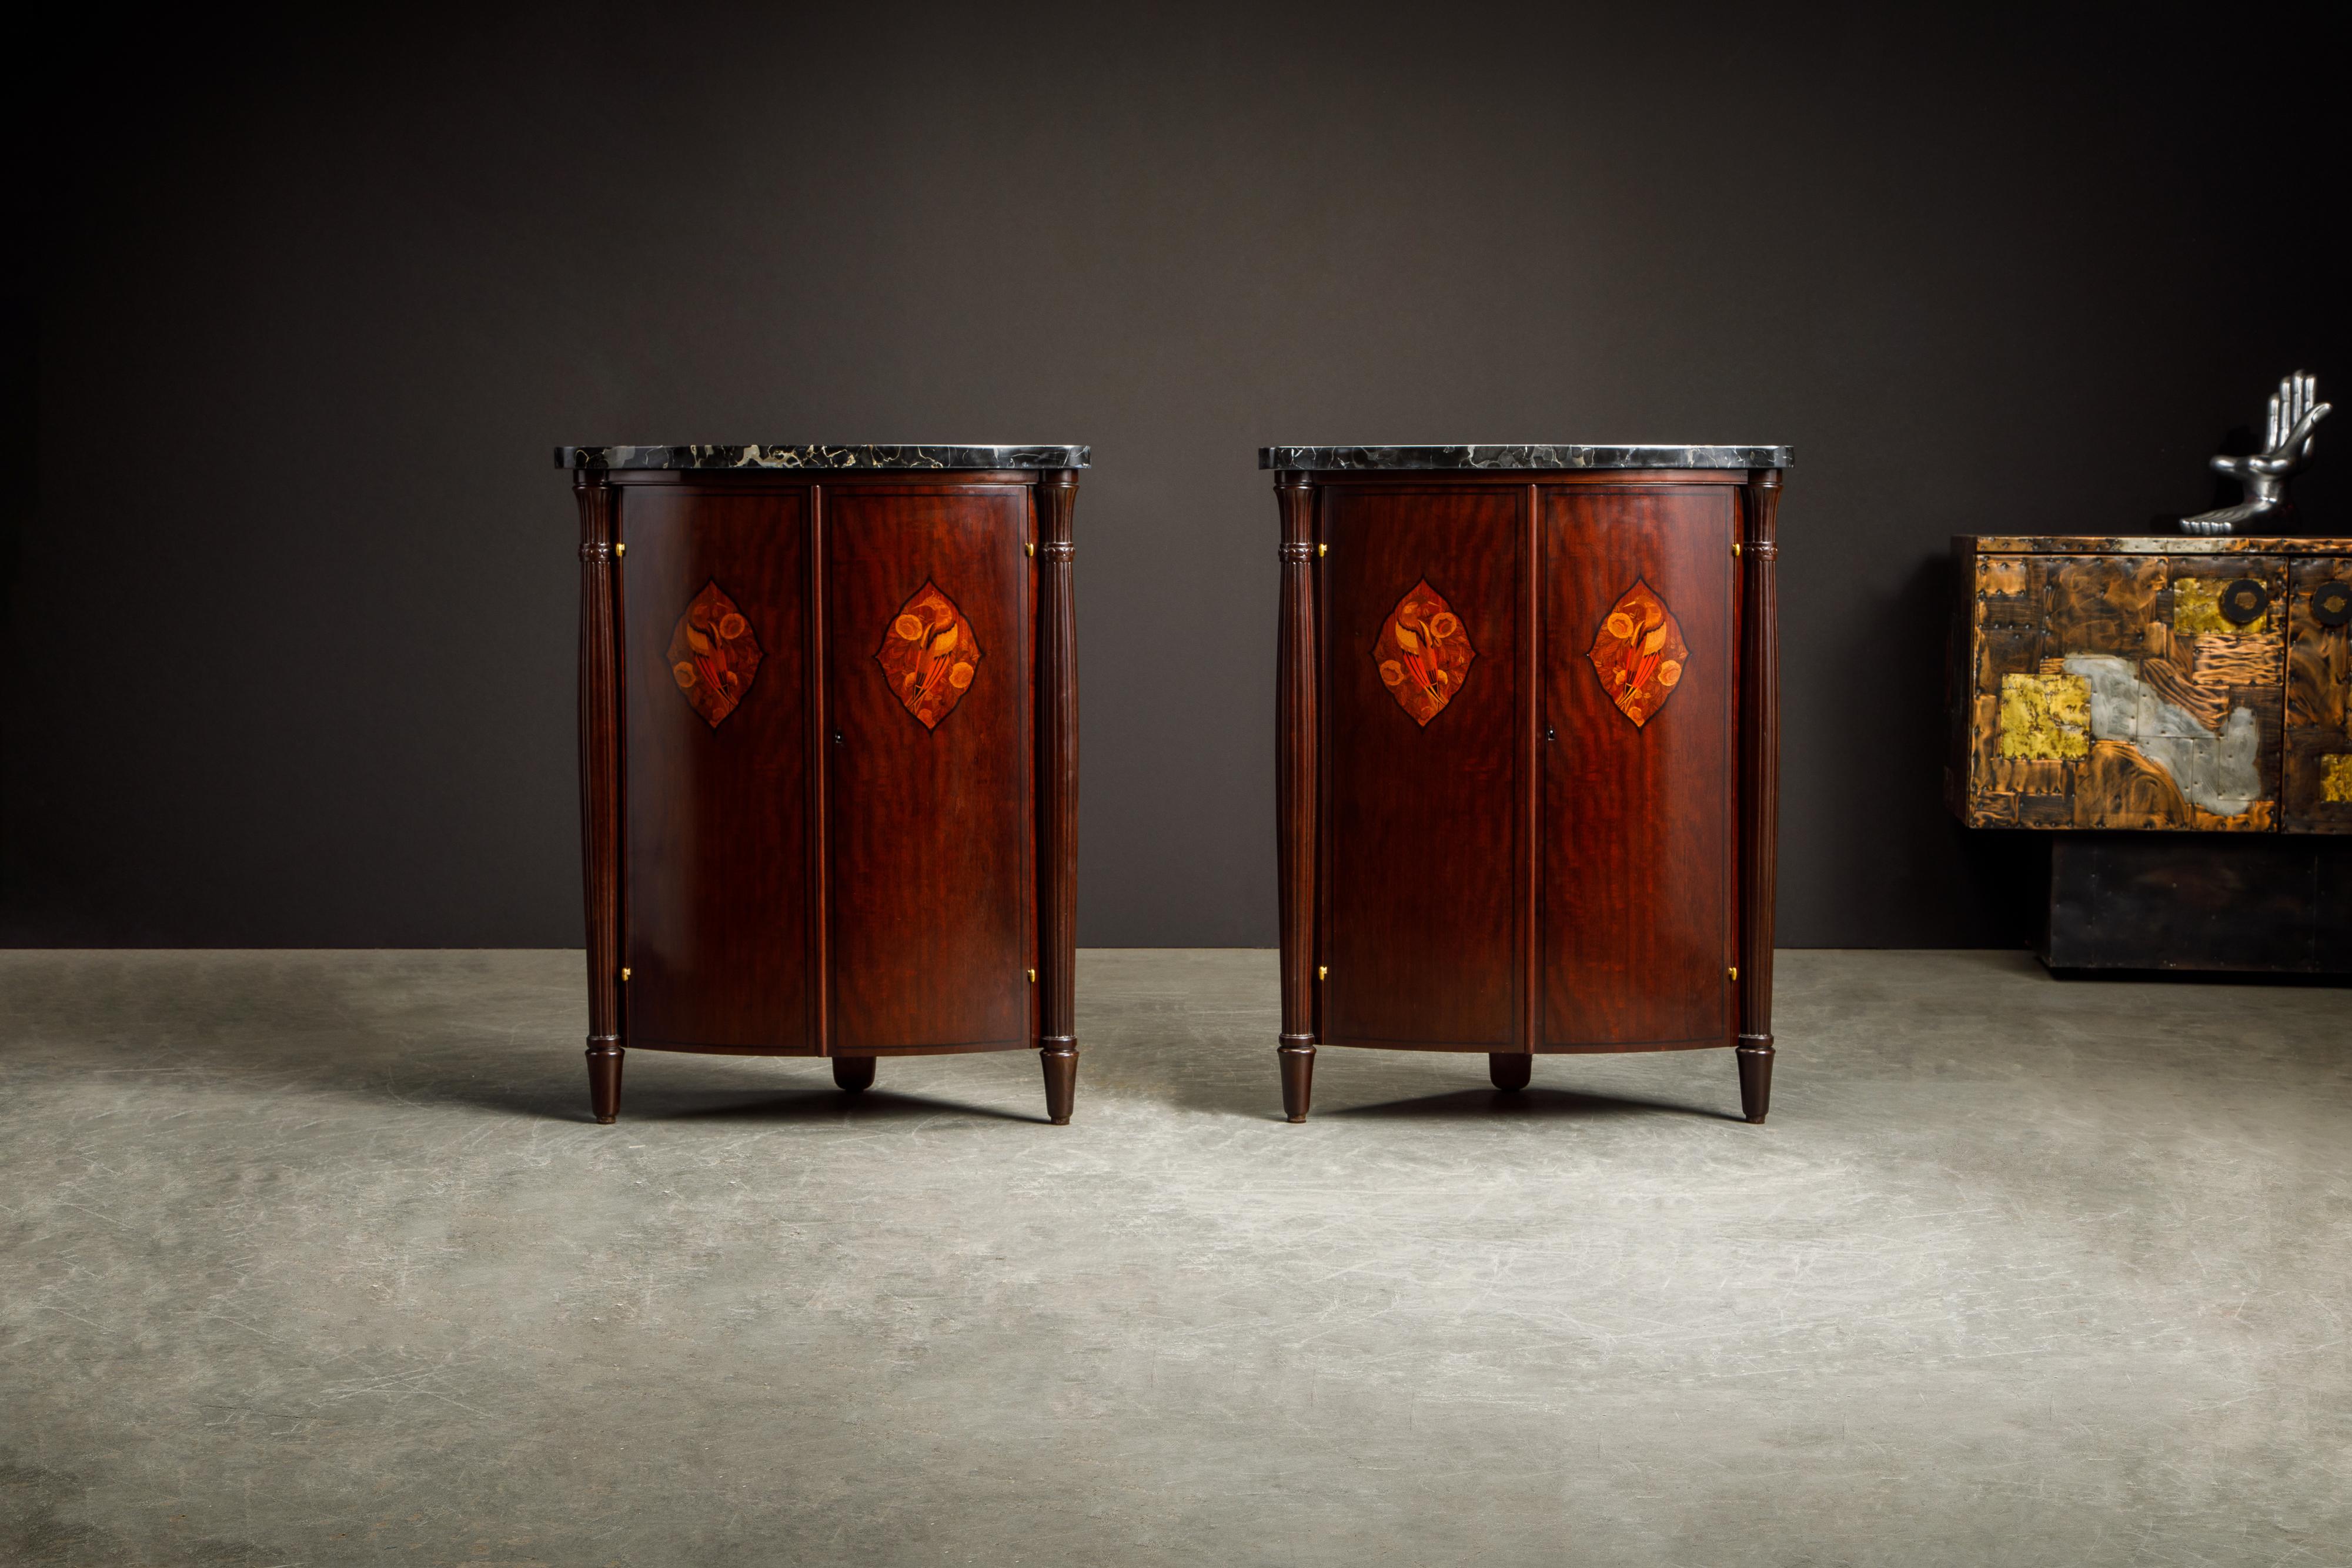 An incredible and important pair of Art Deco marquetry encoignures (corner cabinets) by famed French Art Deco designer and maker Leon Jallot, circa 1920s Paris, France. We just completed restoration to both cabinets in a gorgeous French Polish which